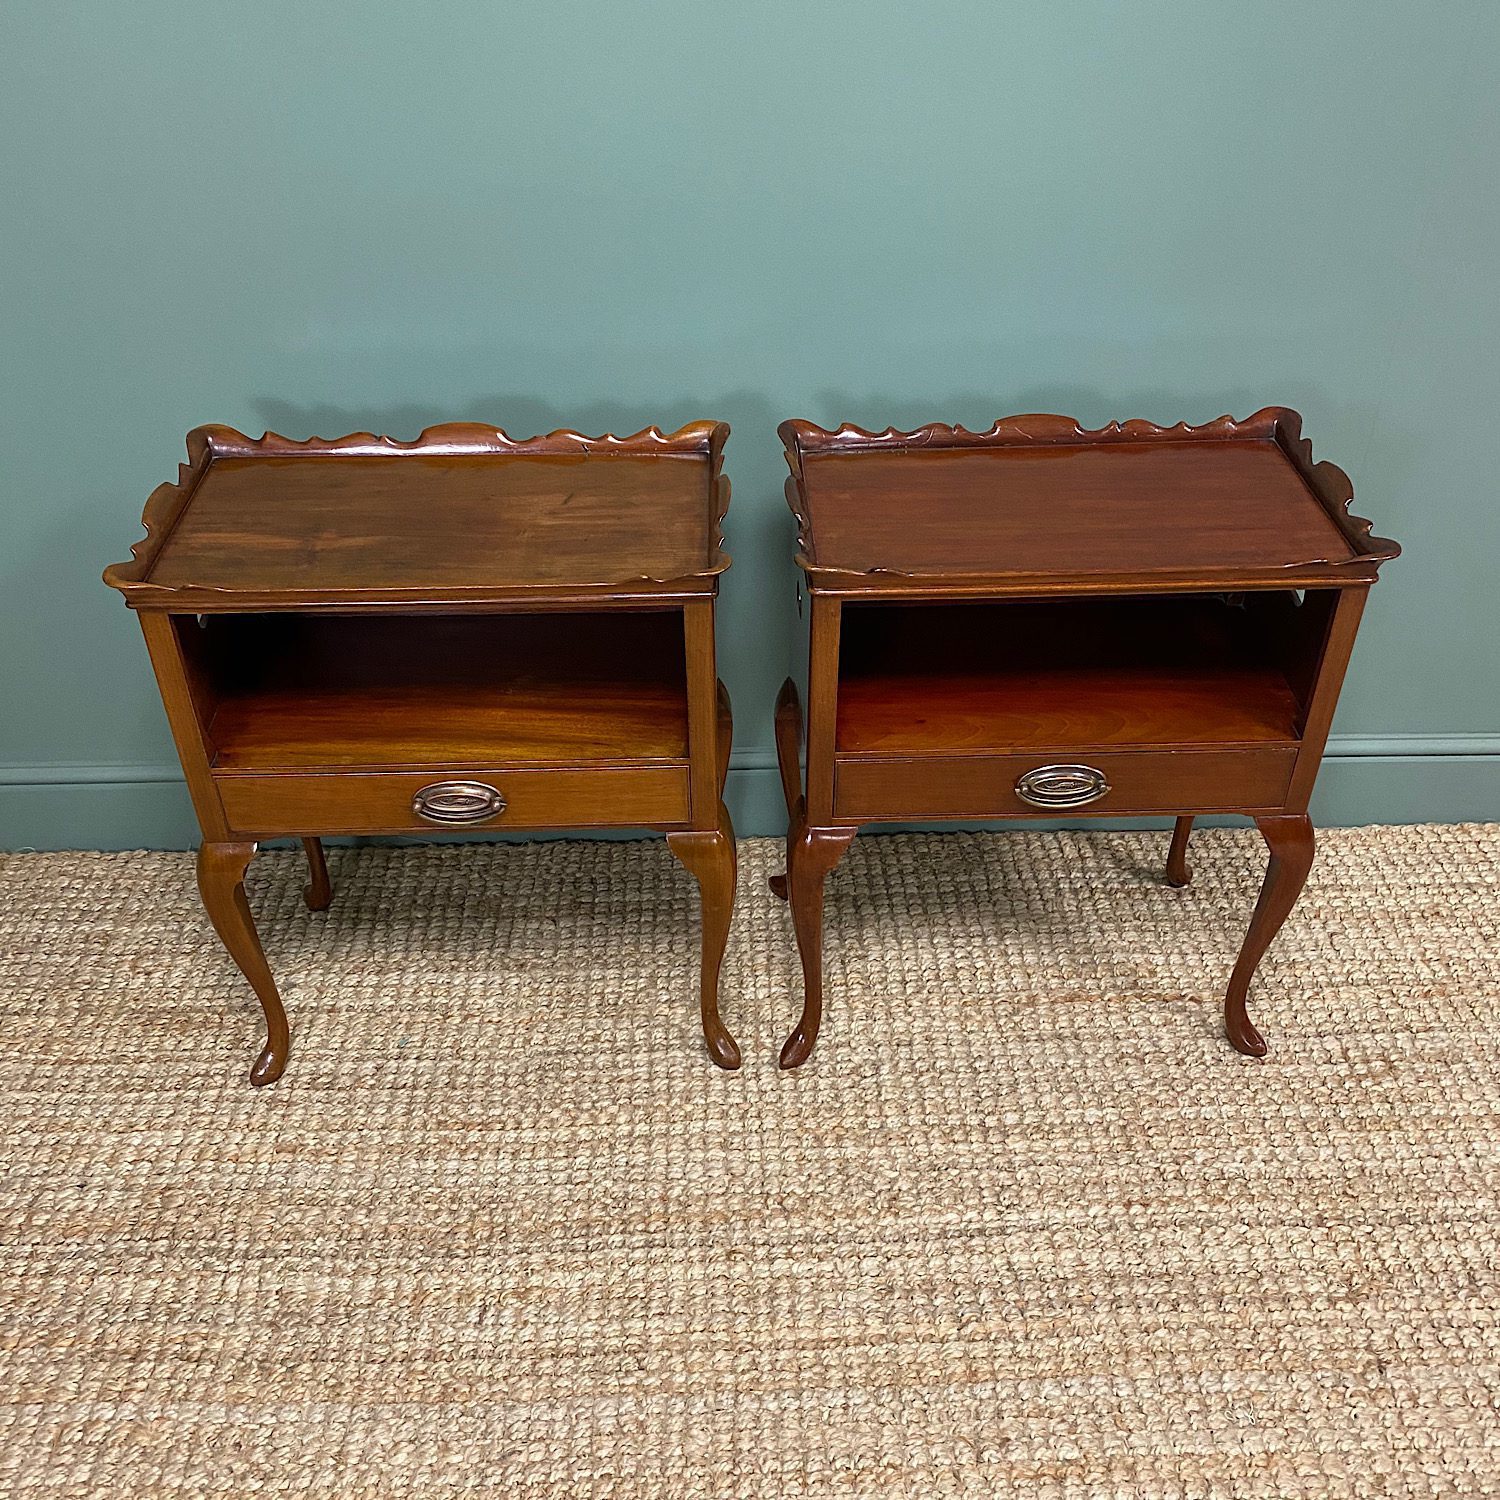 Pair of Edwardian Mahogany Antique Bedside Tables / Cabinets by Morison & Co